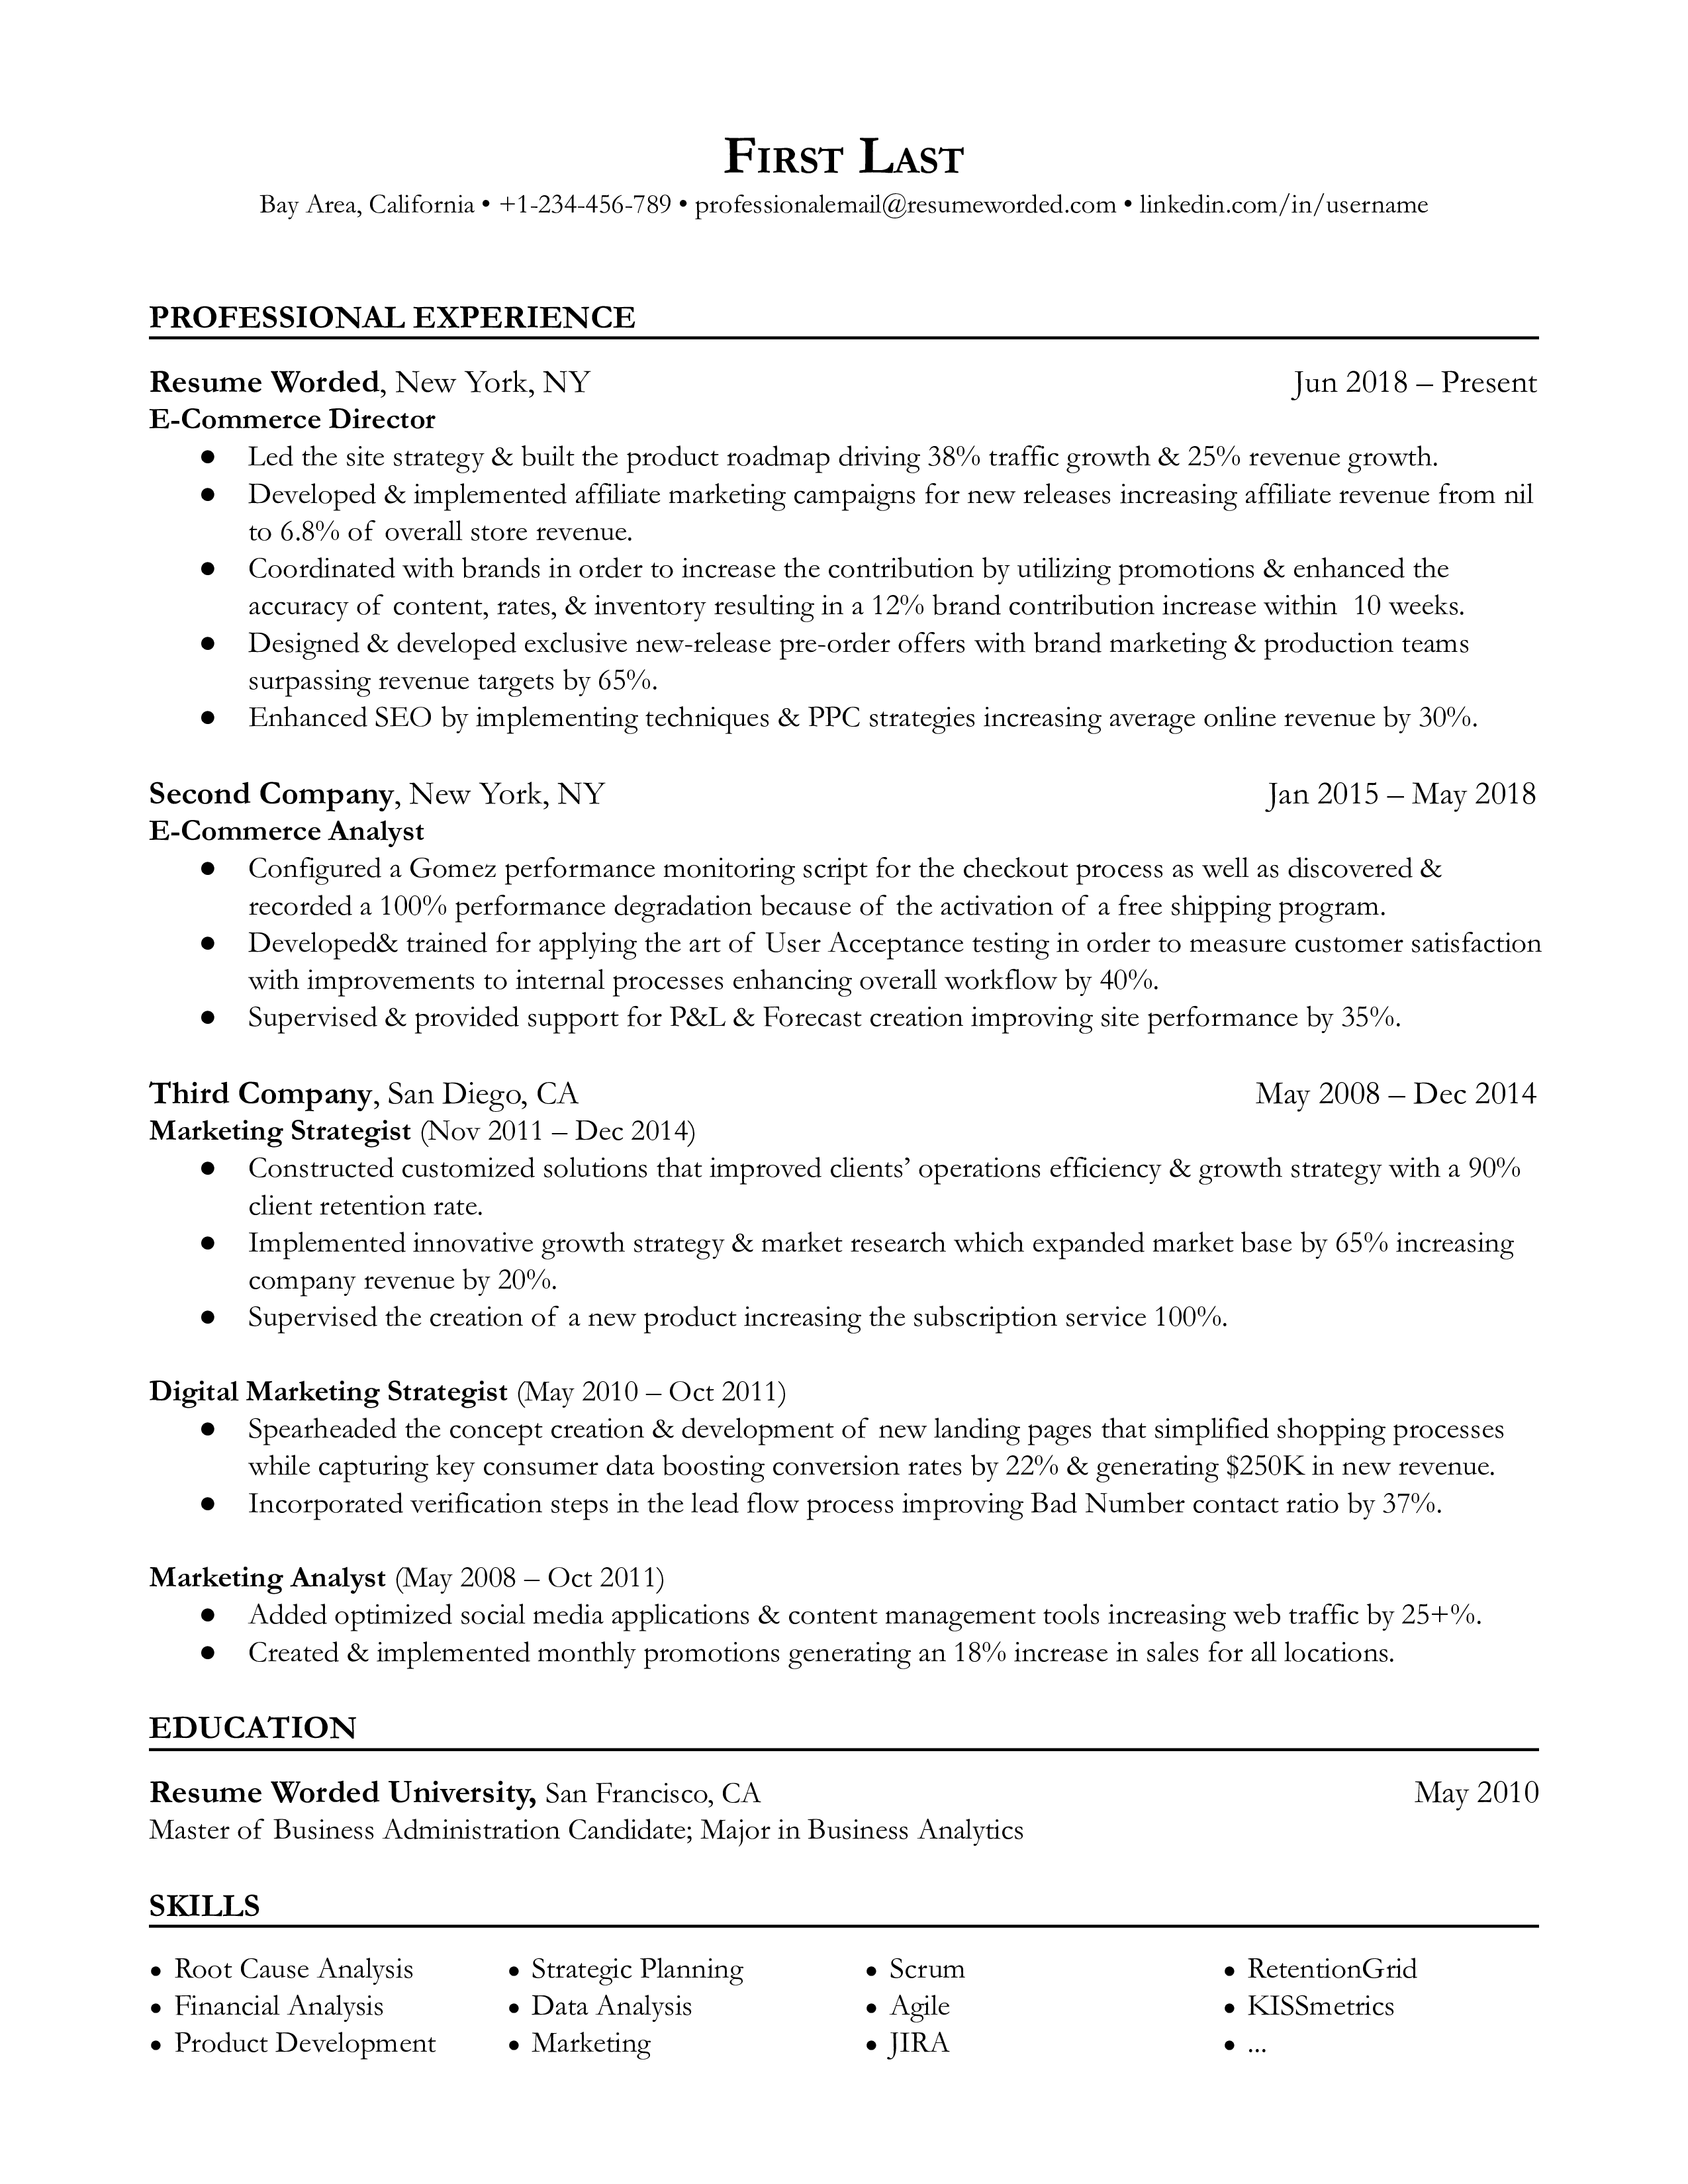 E-Commerce Director Resume Template + Example